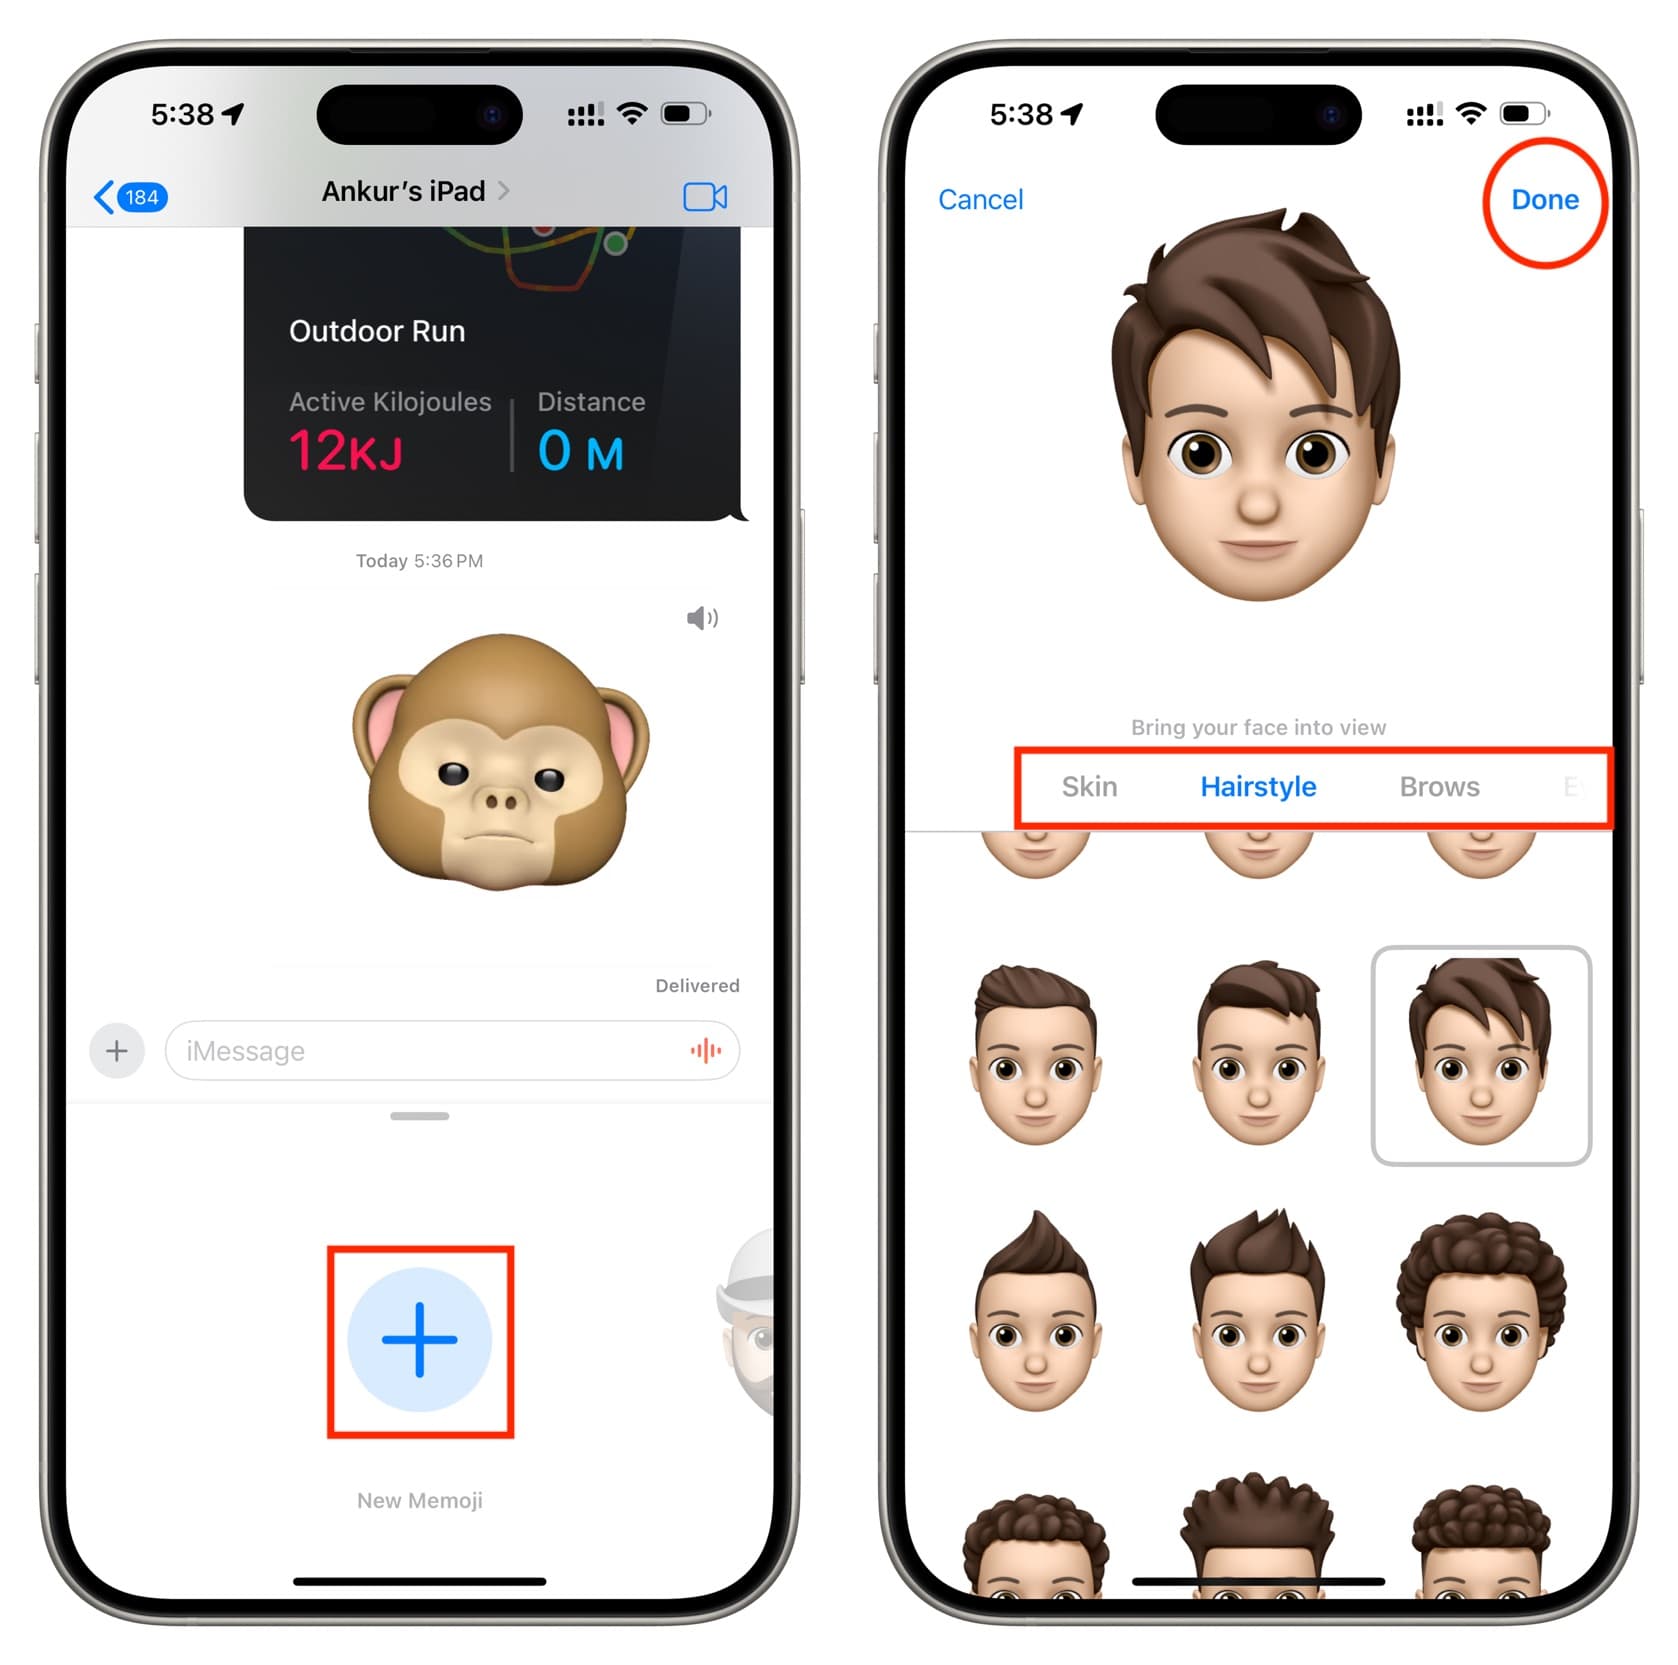 Tap New Memoji to create one in iPhone Messages app